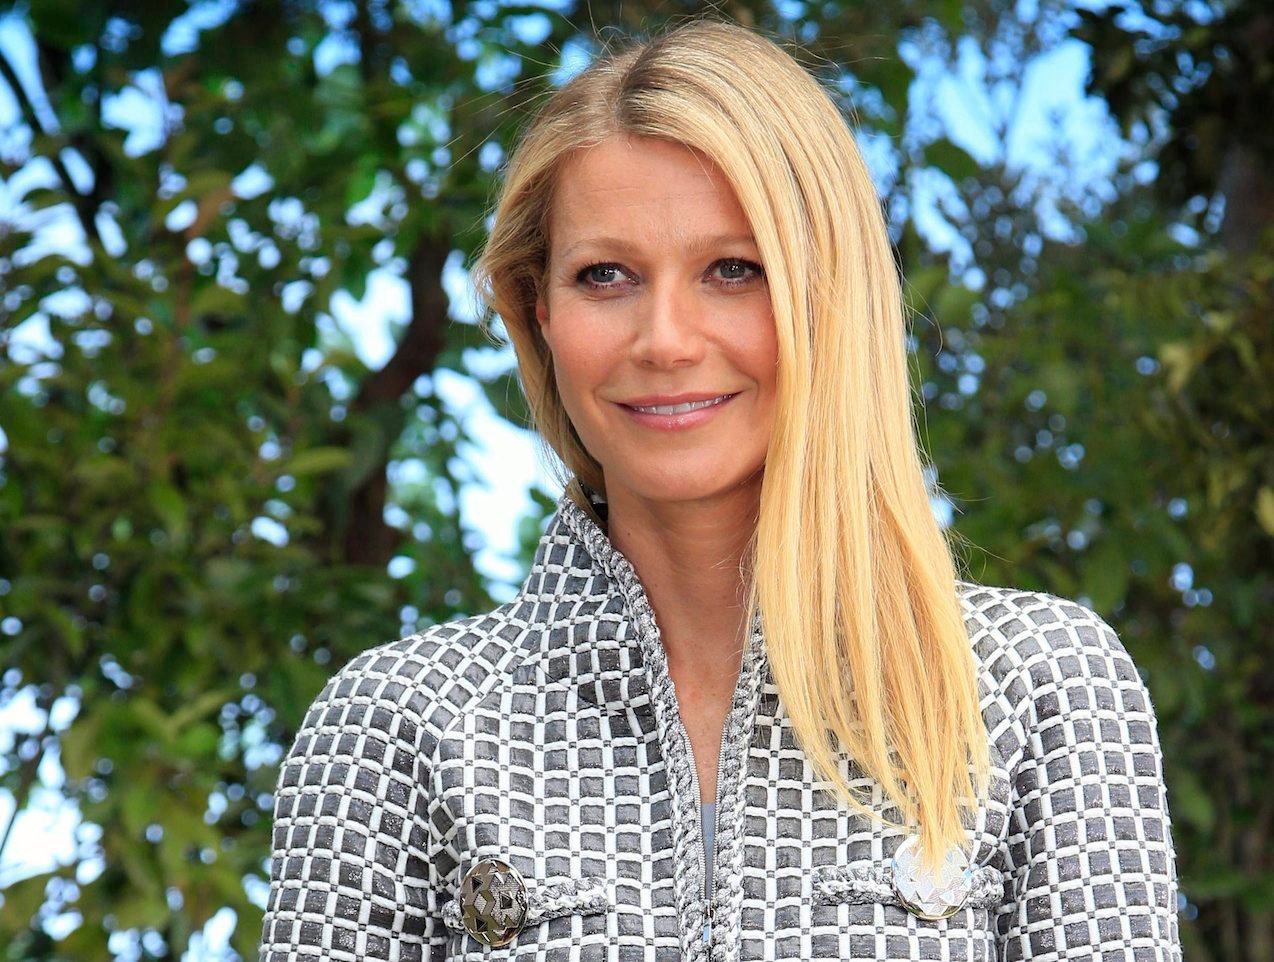 Gwyneth Paltrow poses for photographers before Chanel's Spring-Summer 2016 Haute Couture fashion collection in Paris. Paltrow hosted the inaugural "In Goop Health" event Saturday, June 10, 2017, in Culver City, California, where about 600 women spent the day chatting, learning, eating, shopping and generally indulging in the designer-wellness lifestyle touted by goop.com. (AP Photo/Thibault Camus, File)